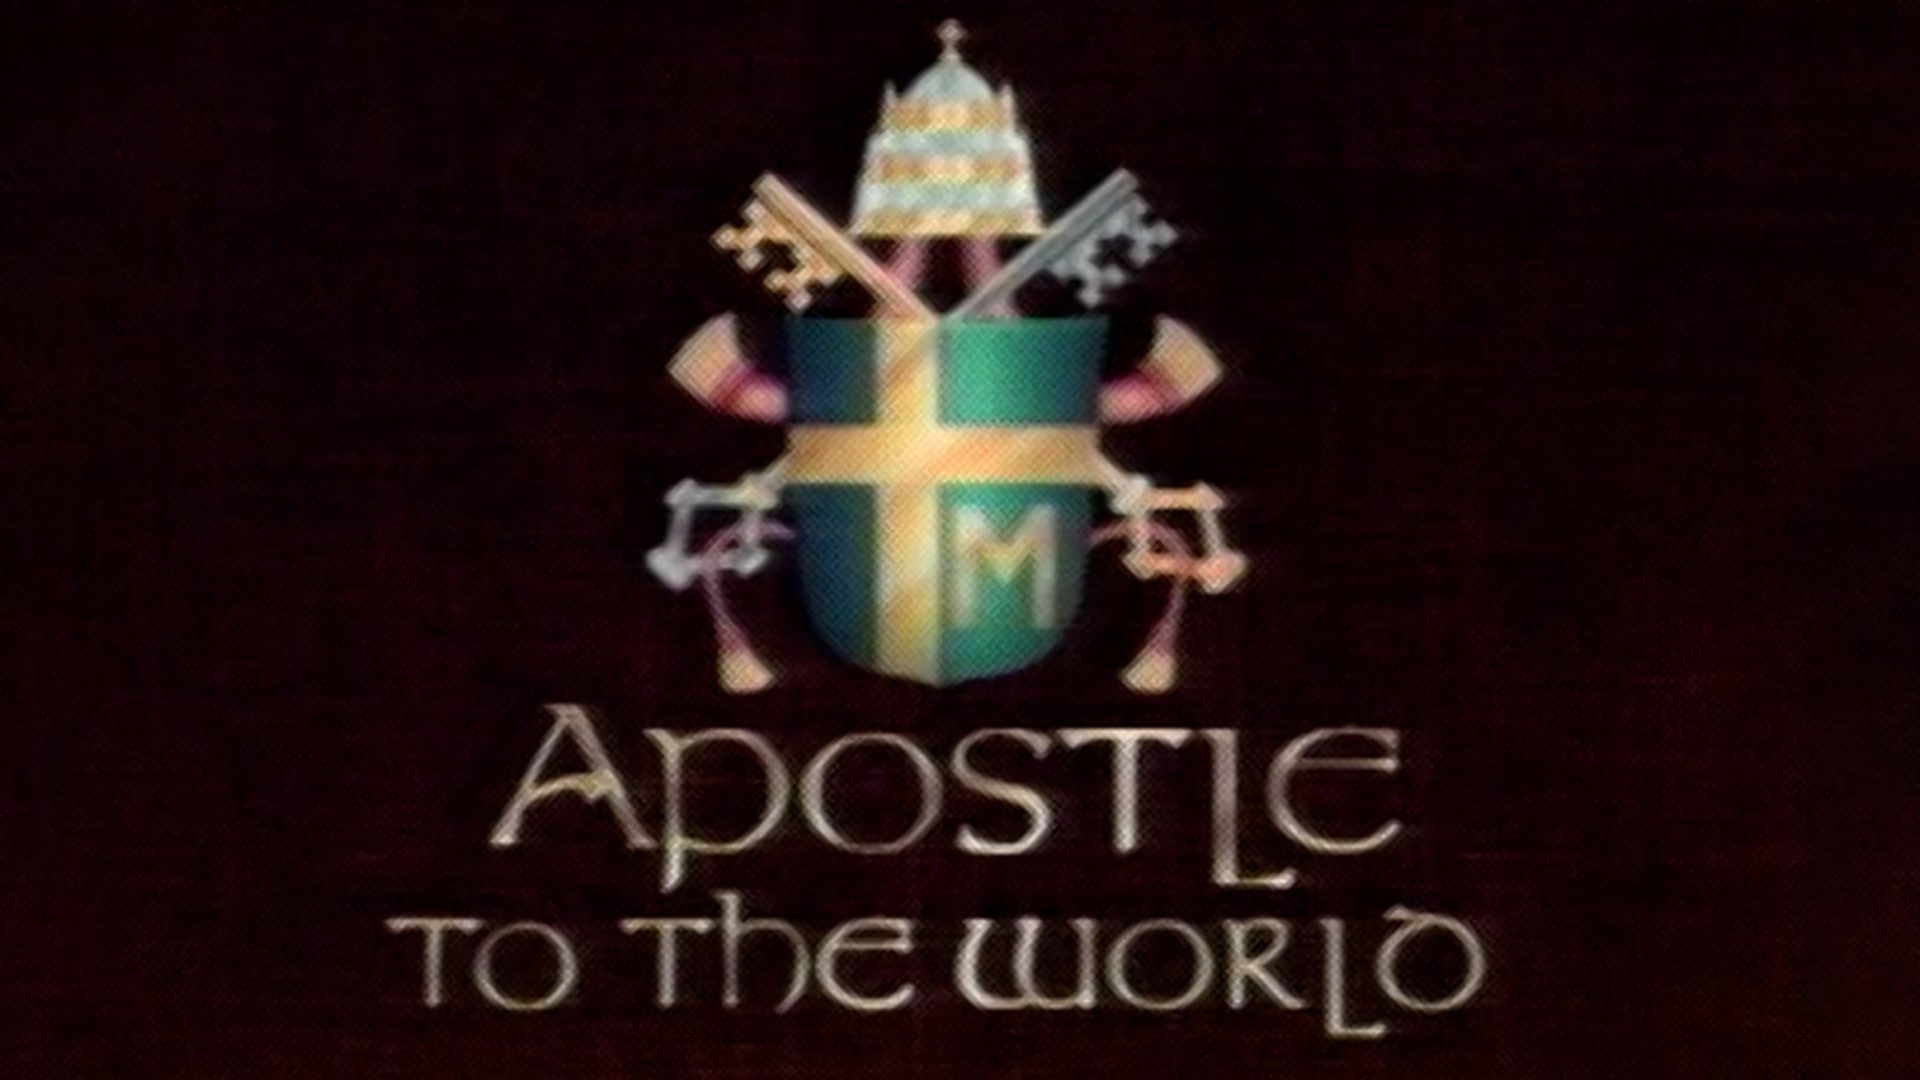 WWL-TV's 1987 special featuring the highlights from Pope John Paul II's visit to the City of New Orleans.